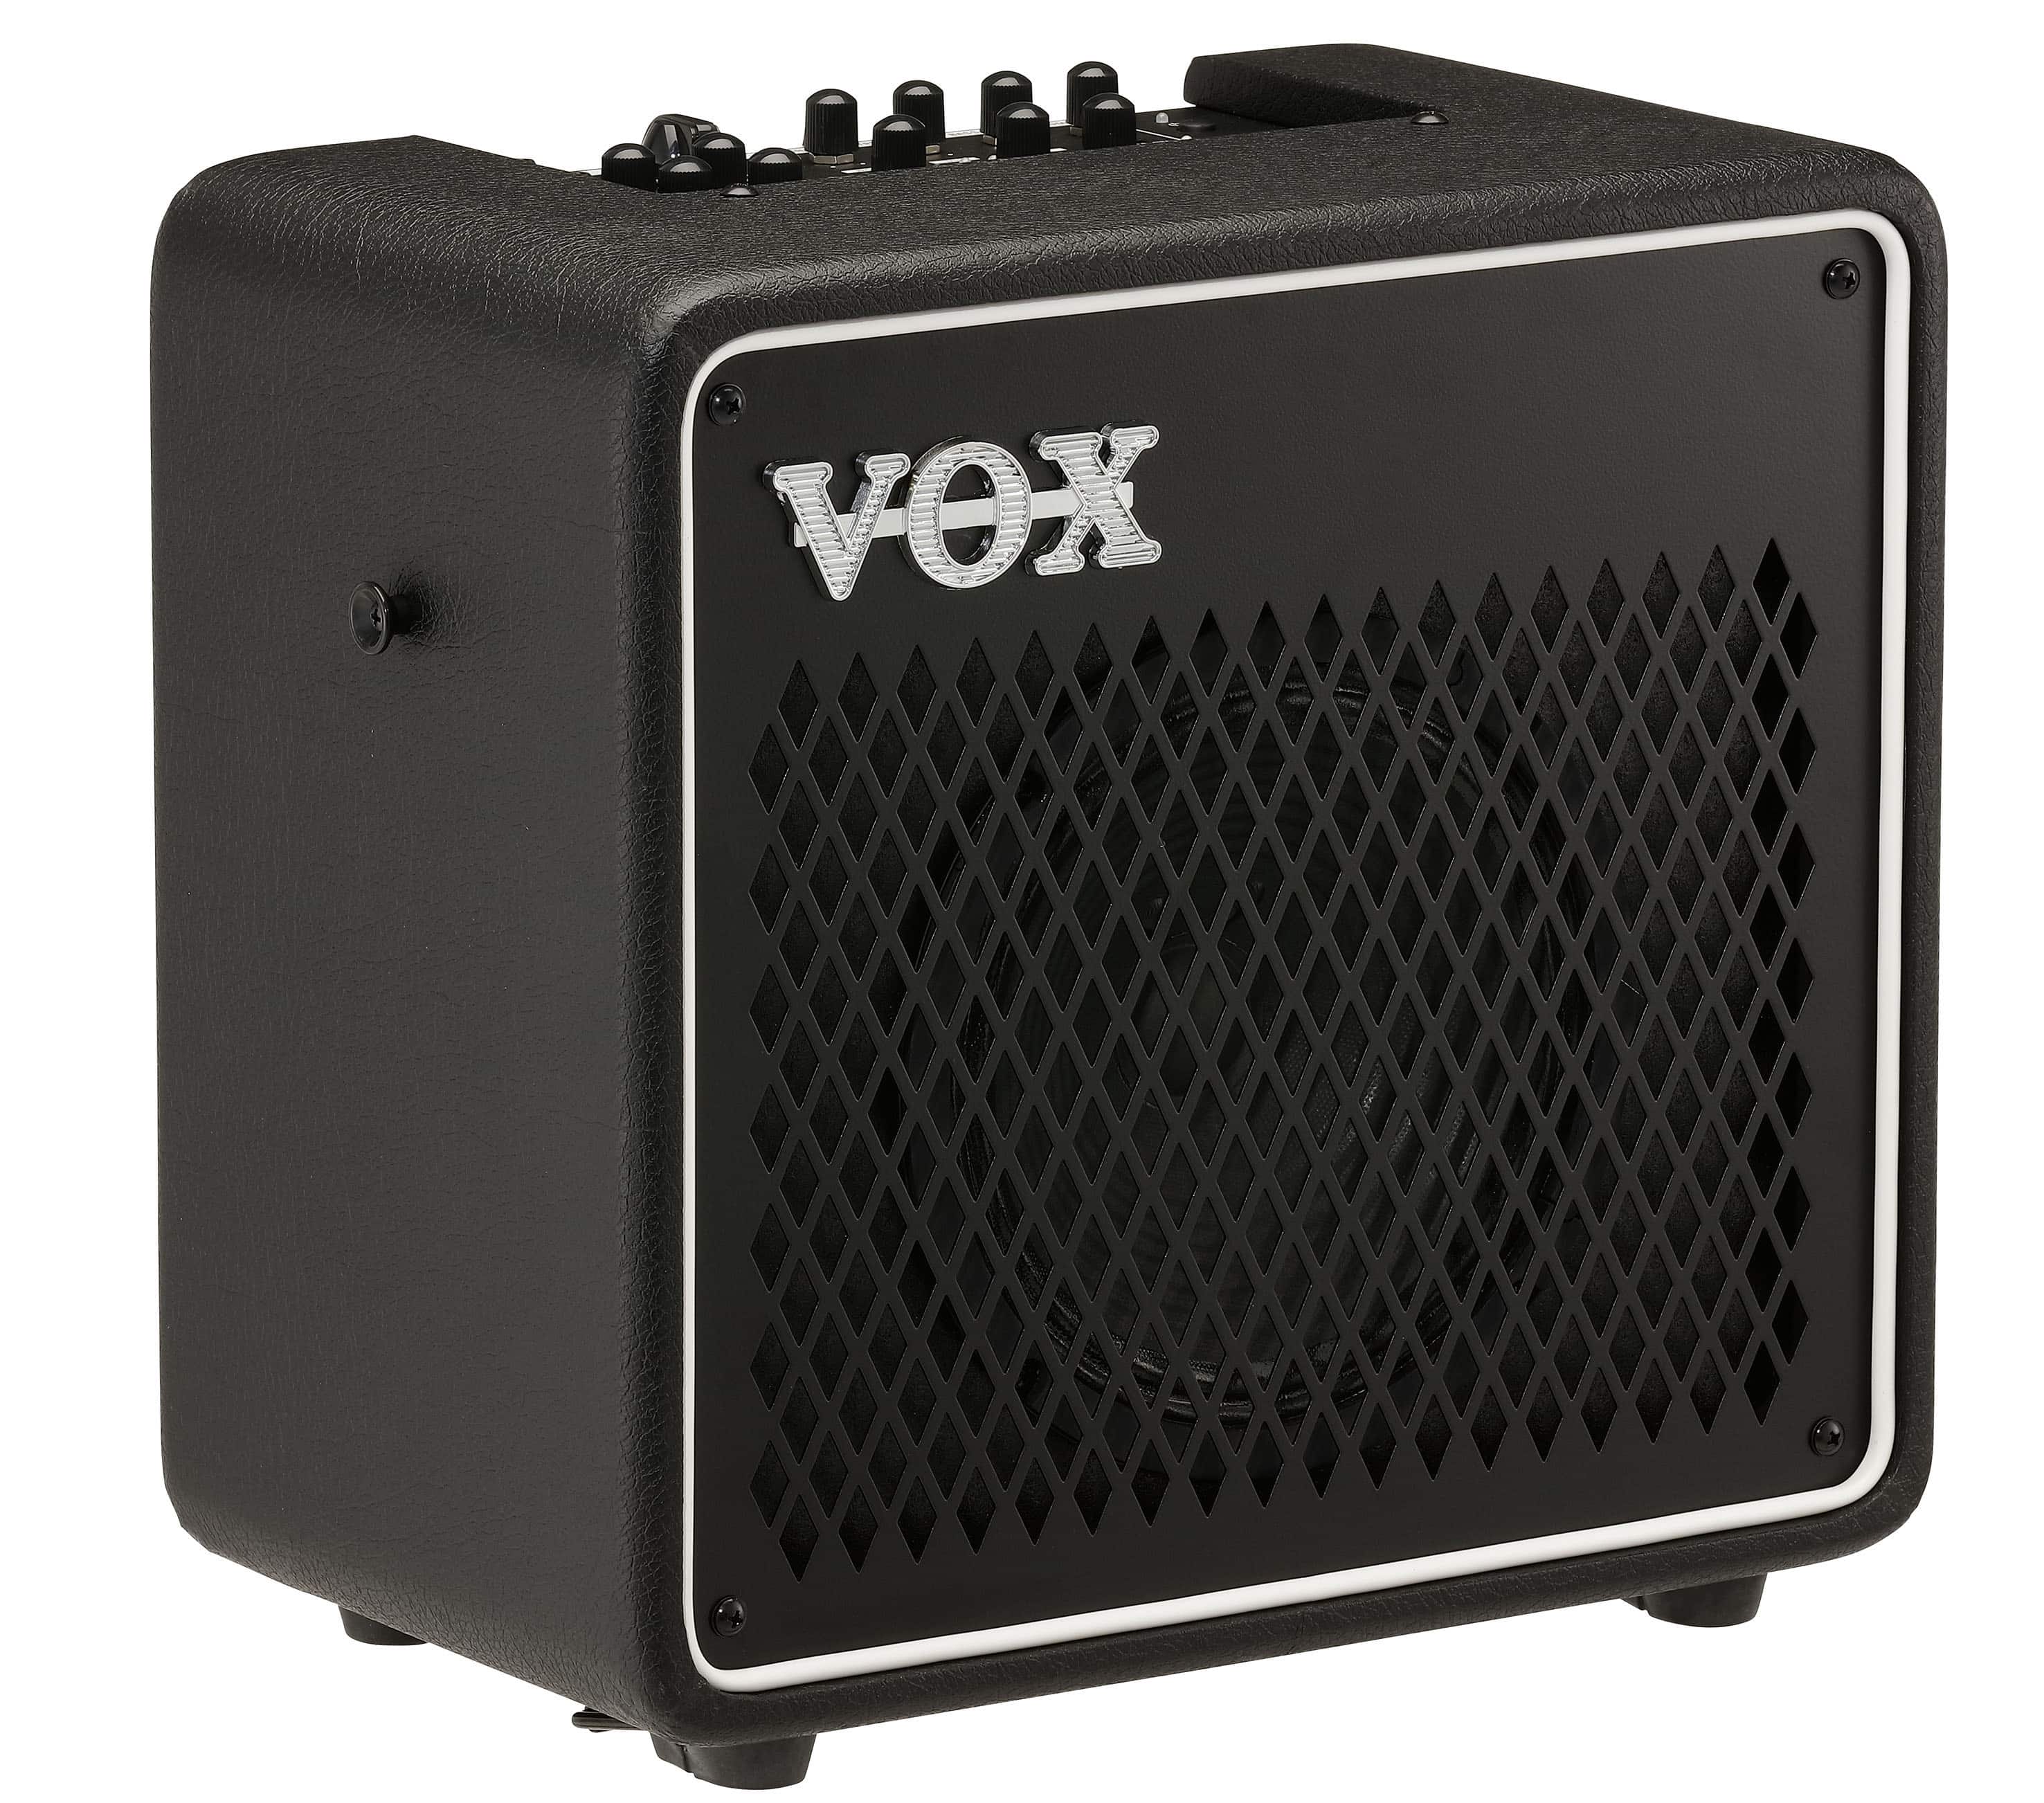 VOX Introduces The MINI GO Series of Portable Modeling Guitar Amplifiers